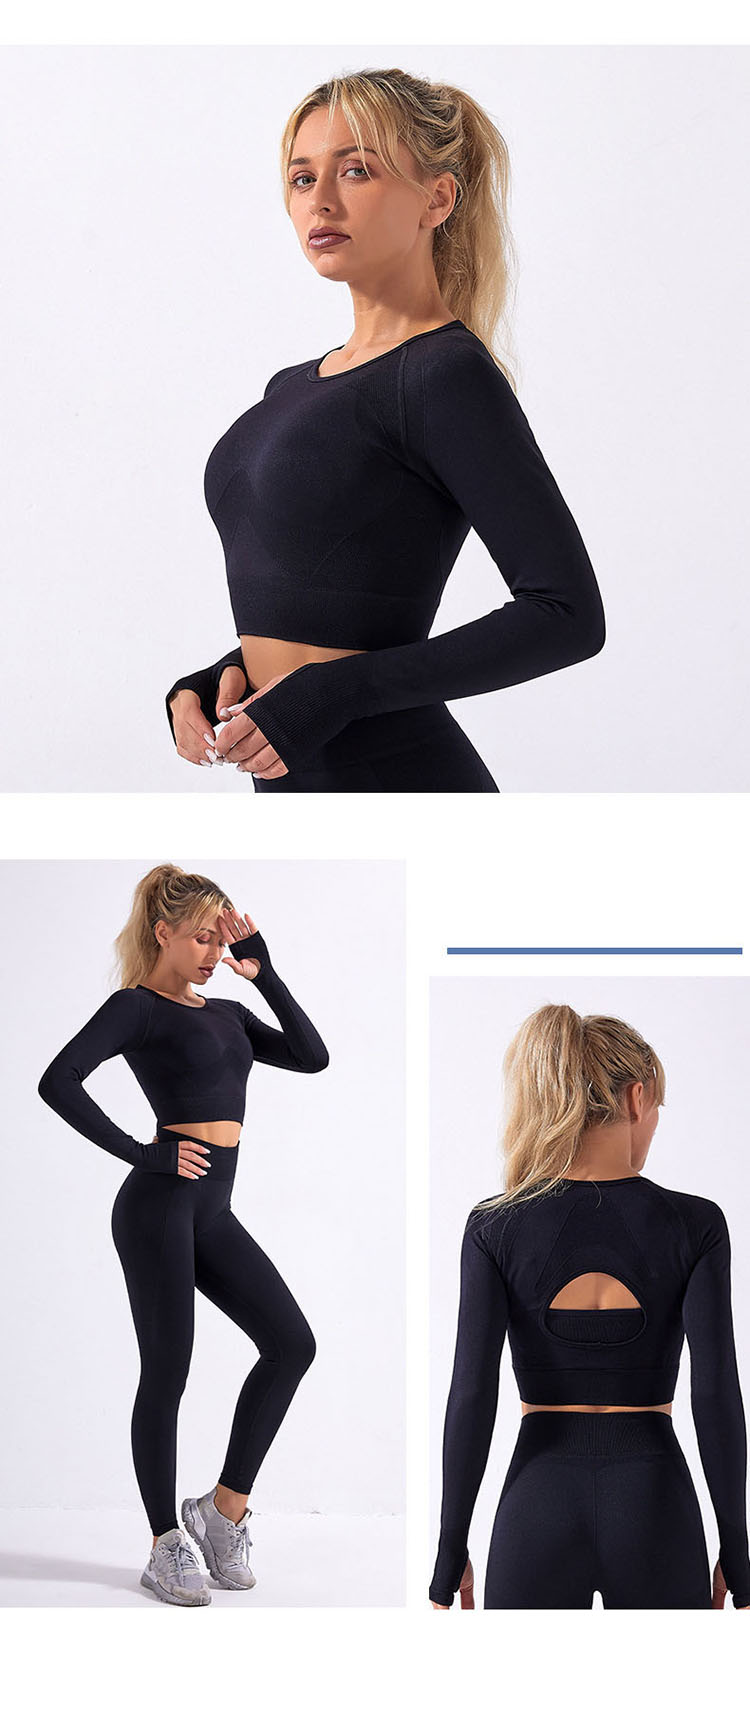 the silhouette of a dance-like top is becoming more and more common